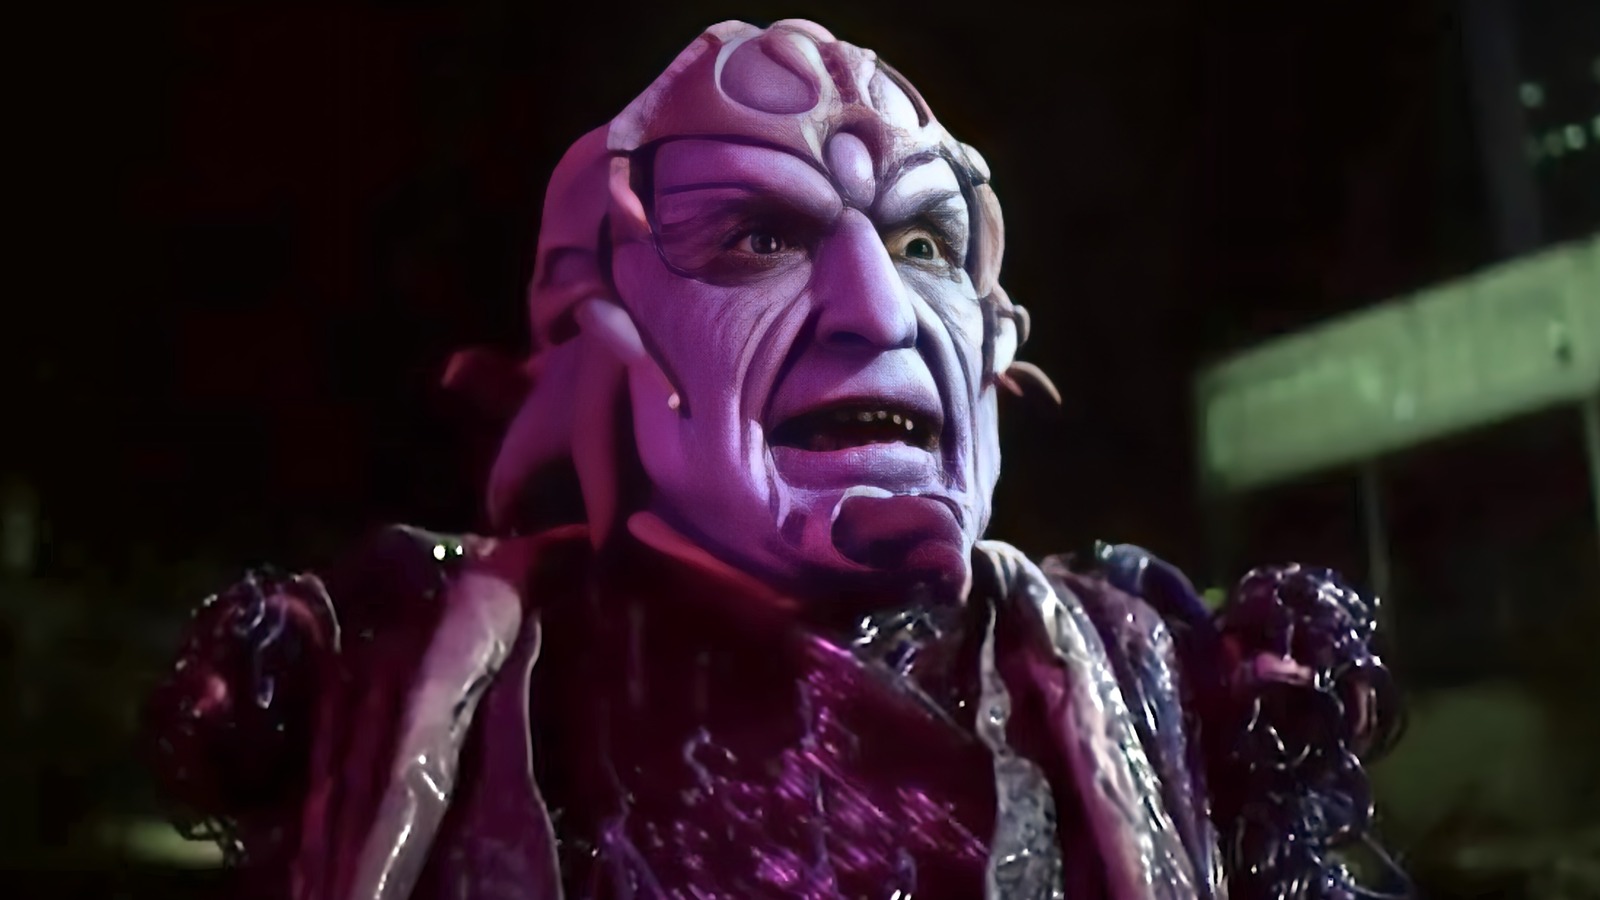 Power Rangers: Who Plays Ivan Ooze & What Does He Look Like In Real Life?